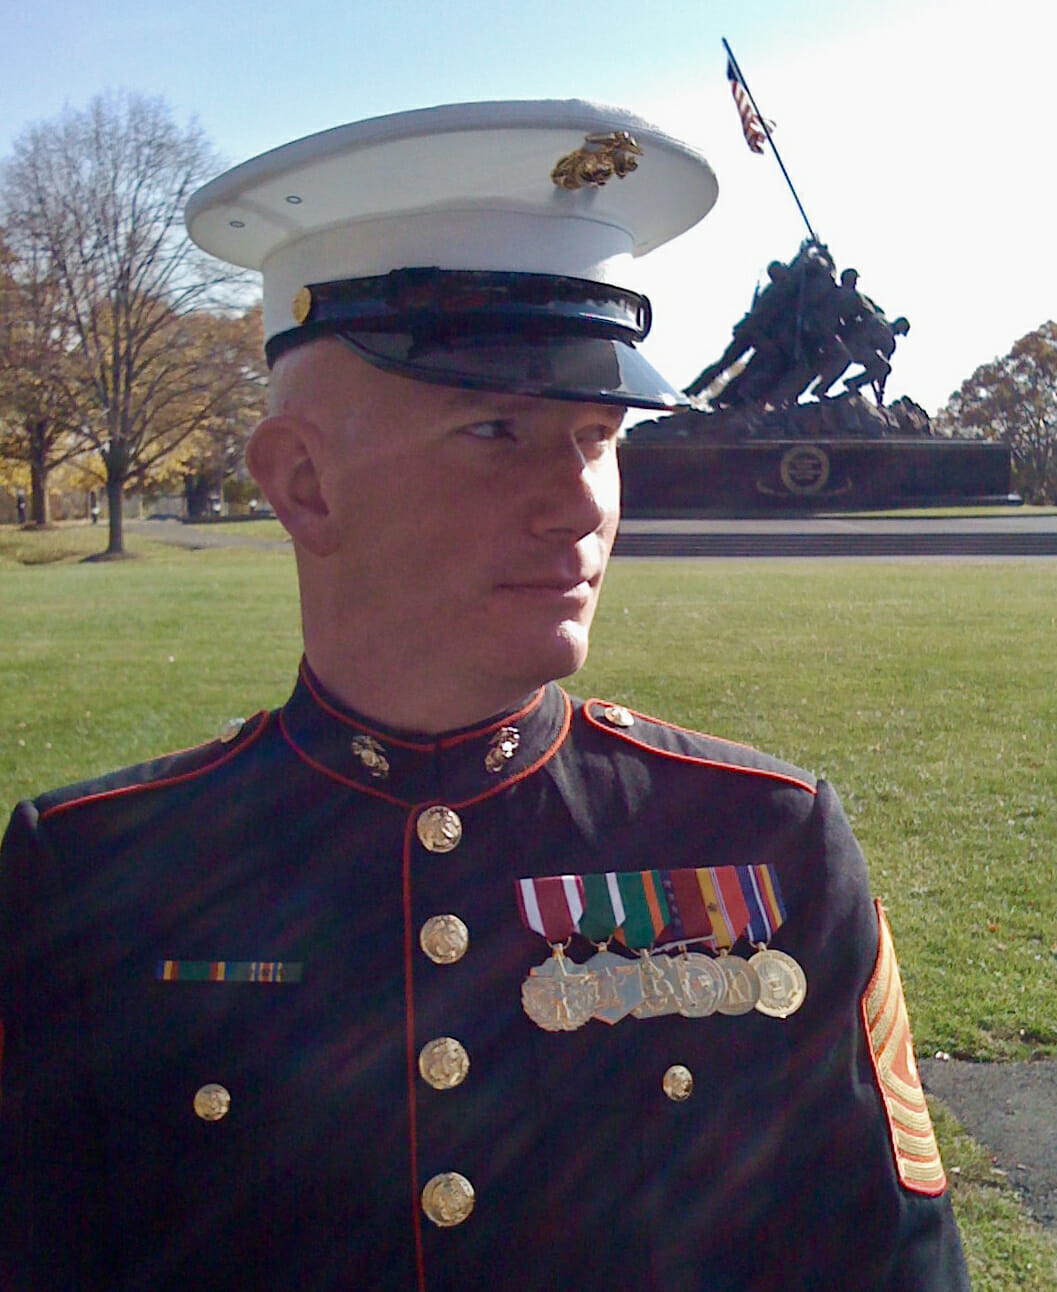 The Voice of the Marine Corps at the Iwo Jima Memorial